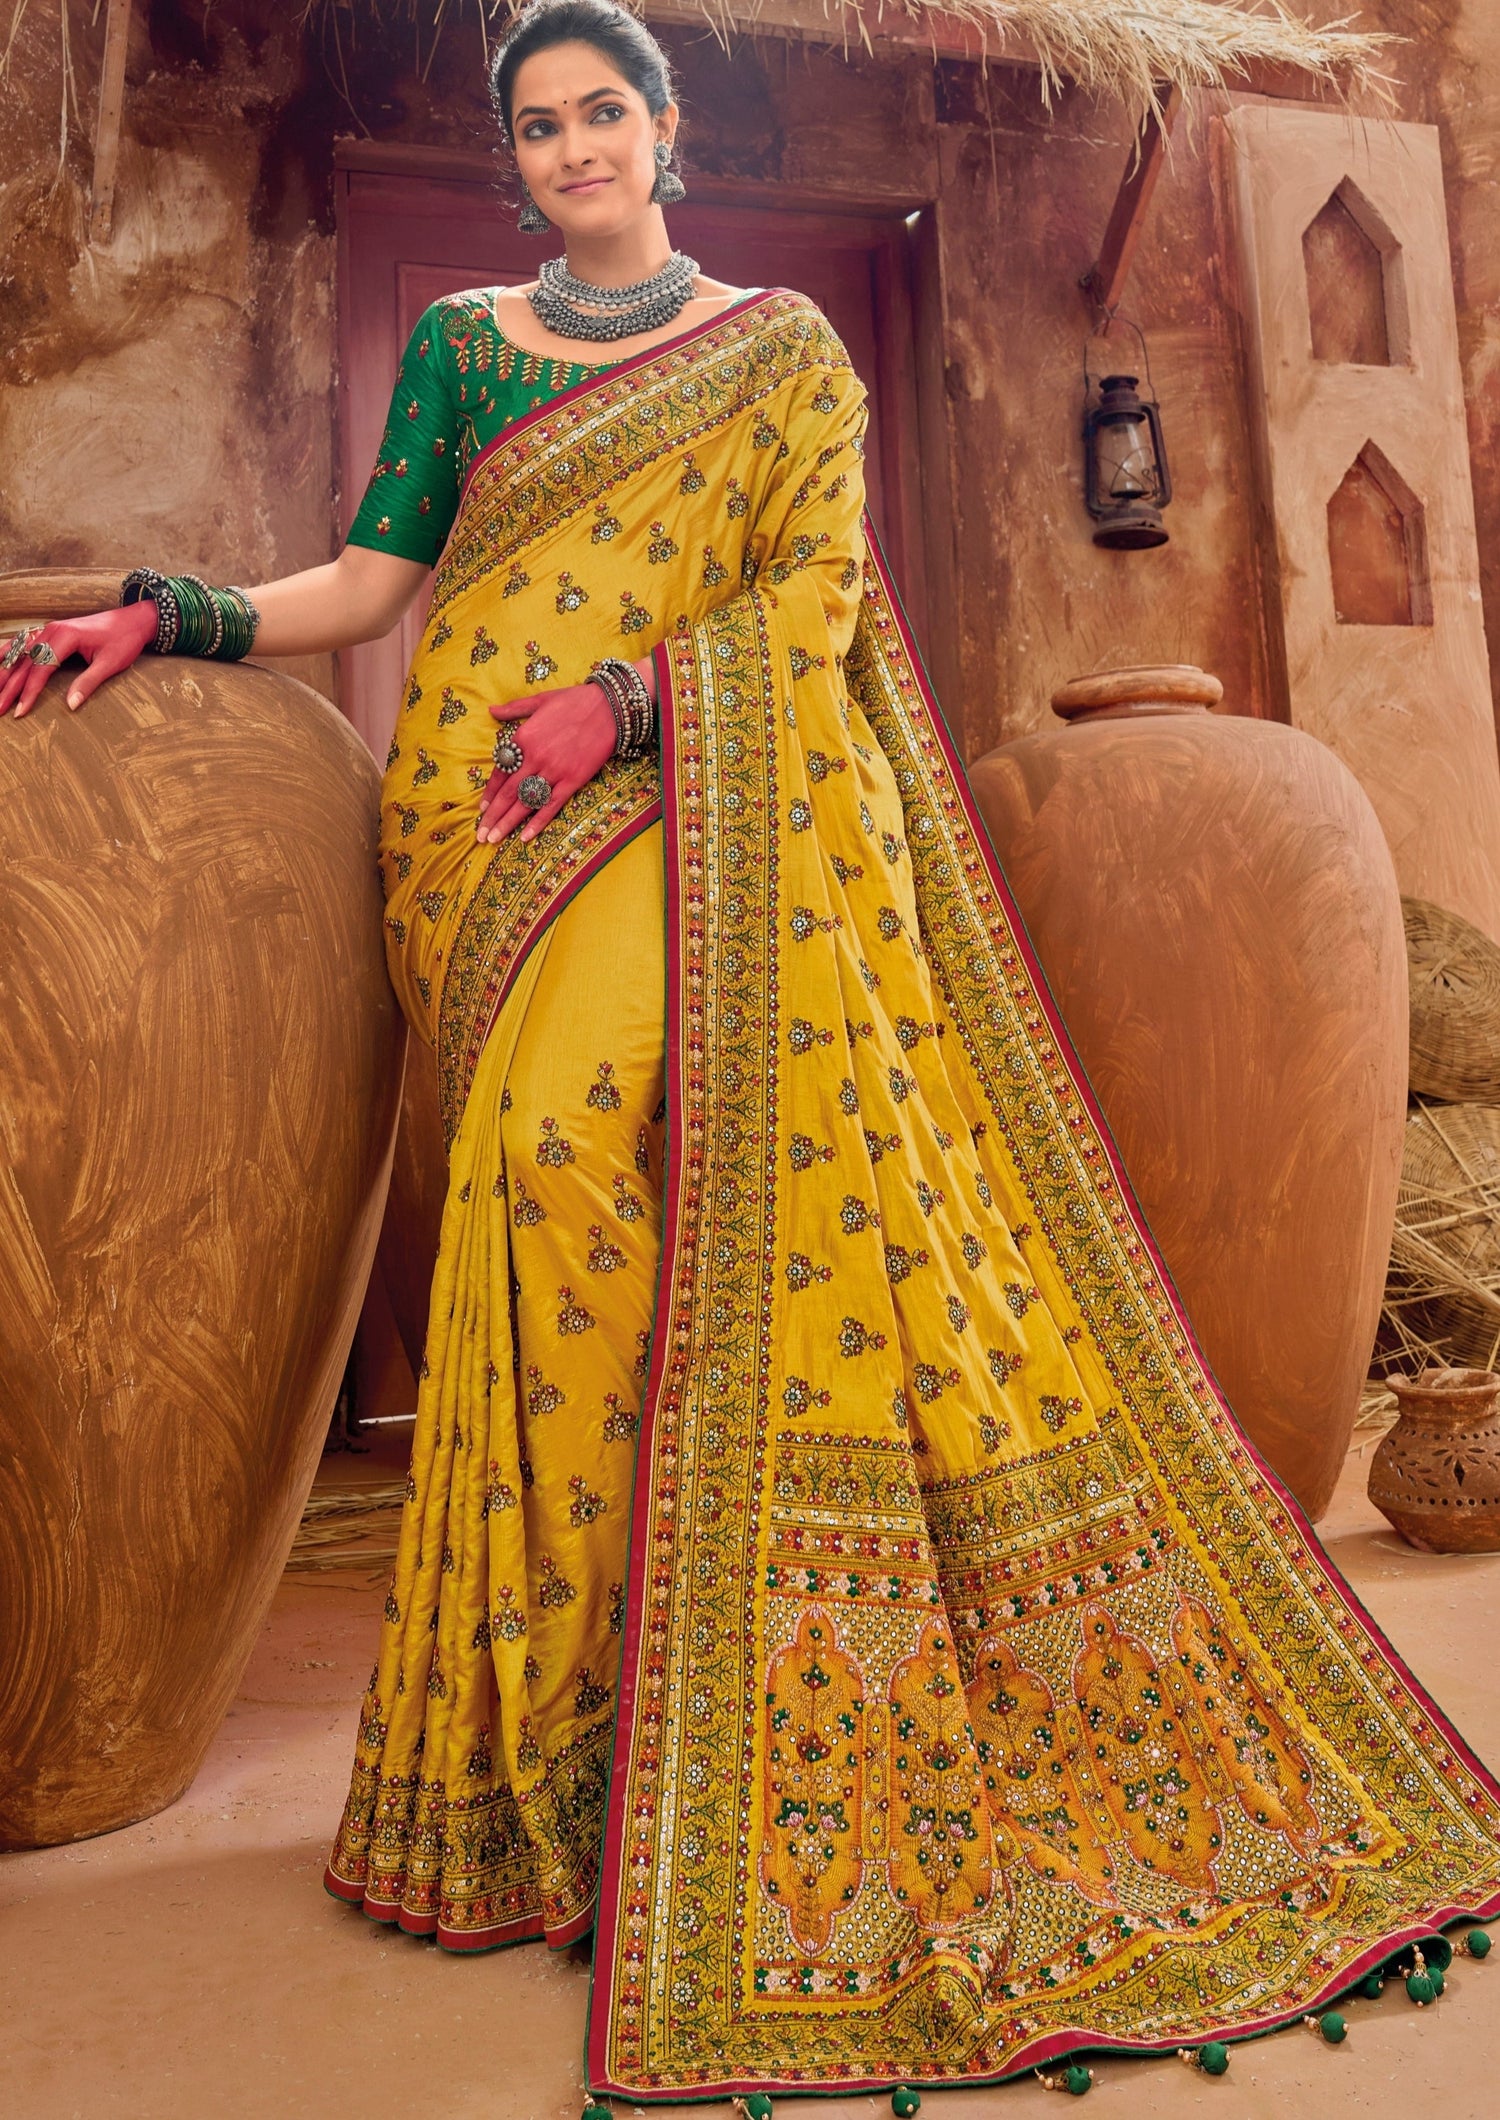 Shop gujarati kutch embroidery work silk yellow saree blouse designs online with price india usa.